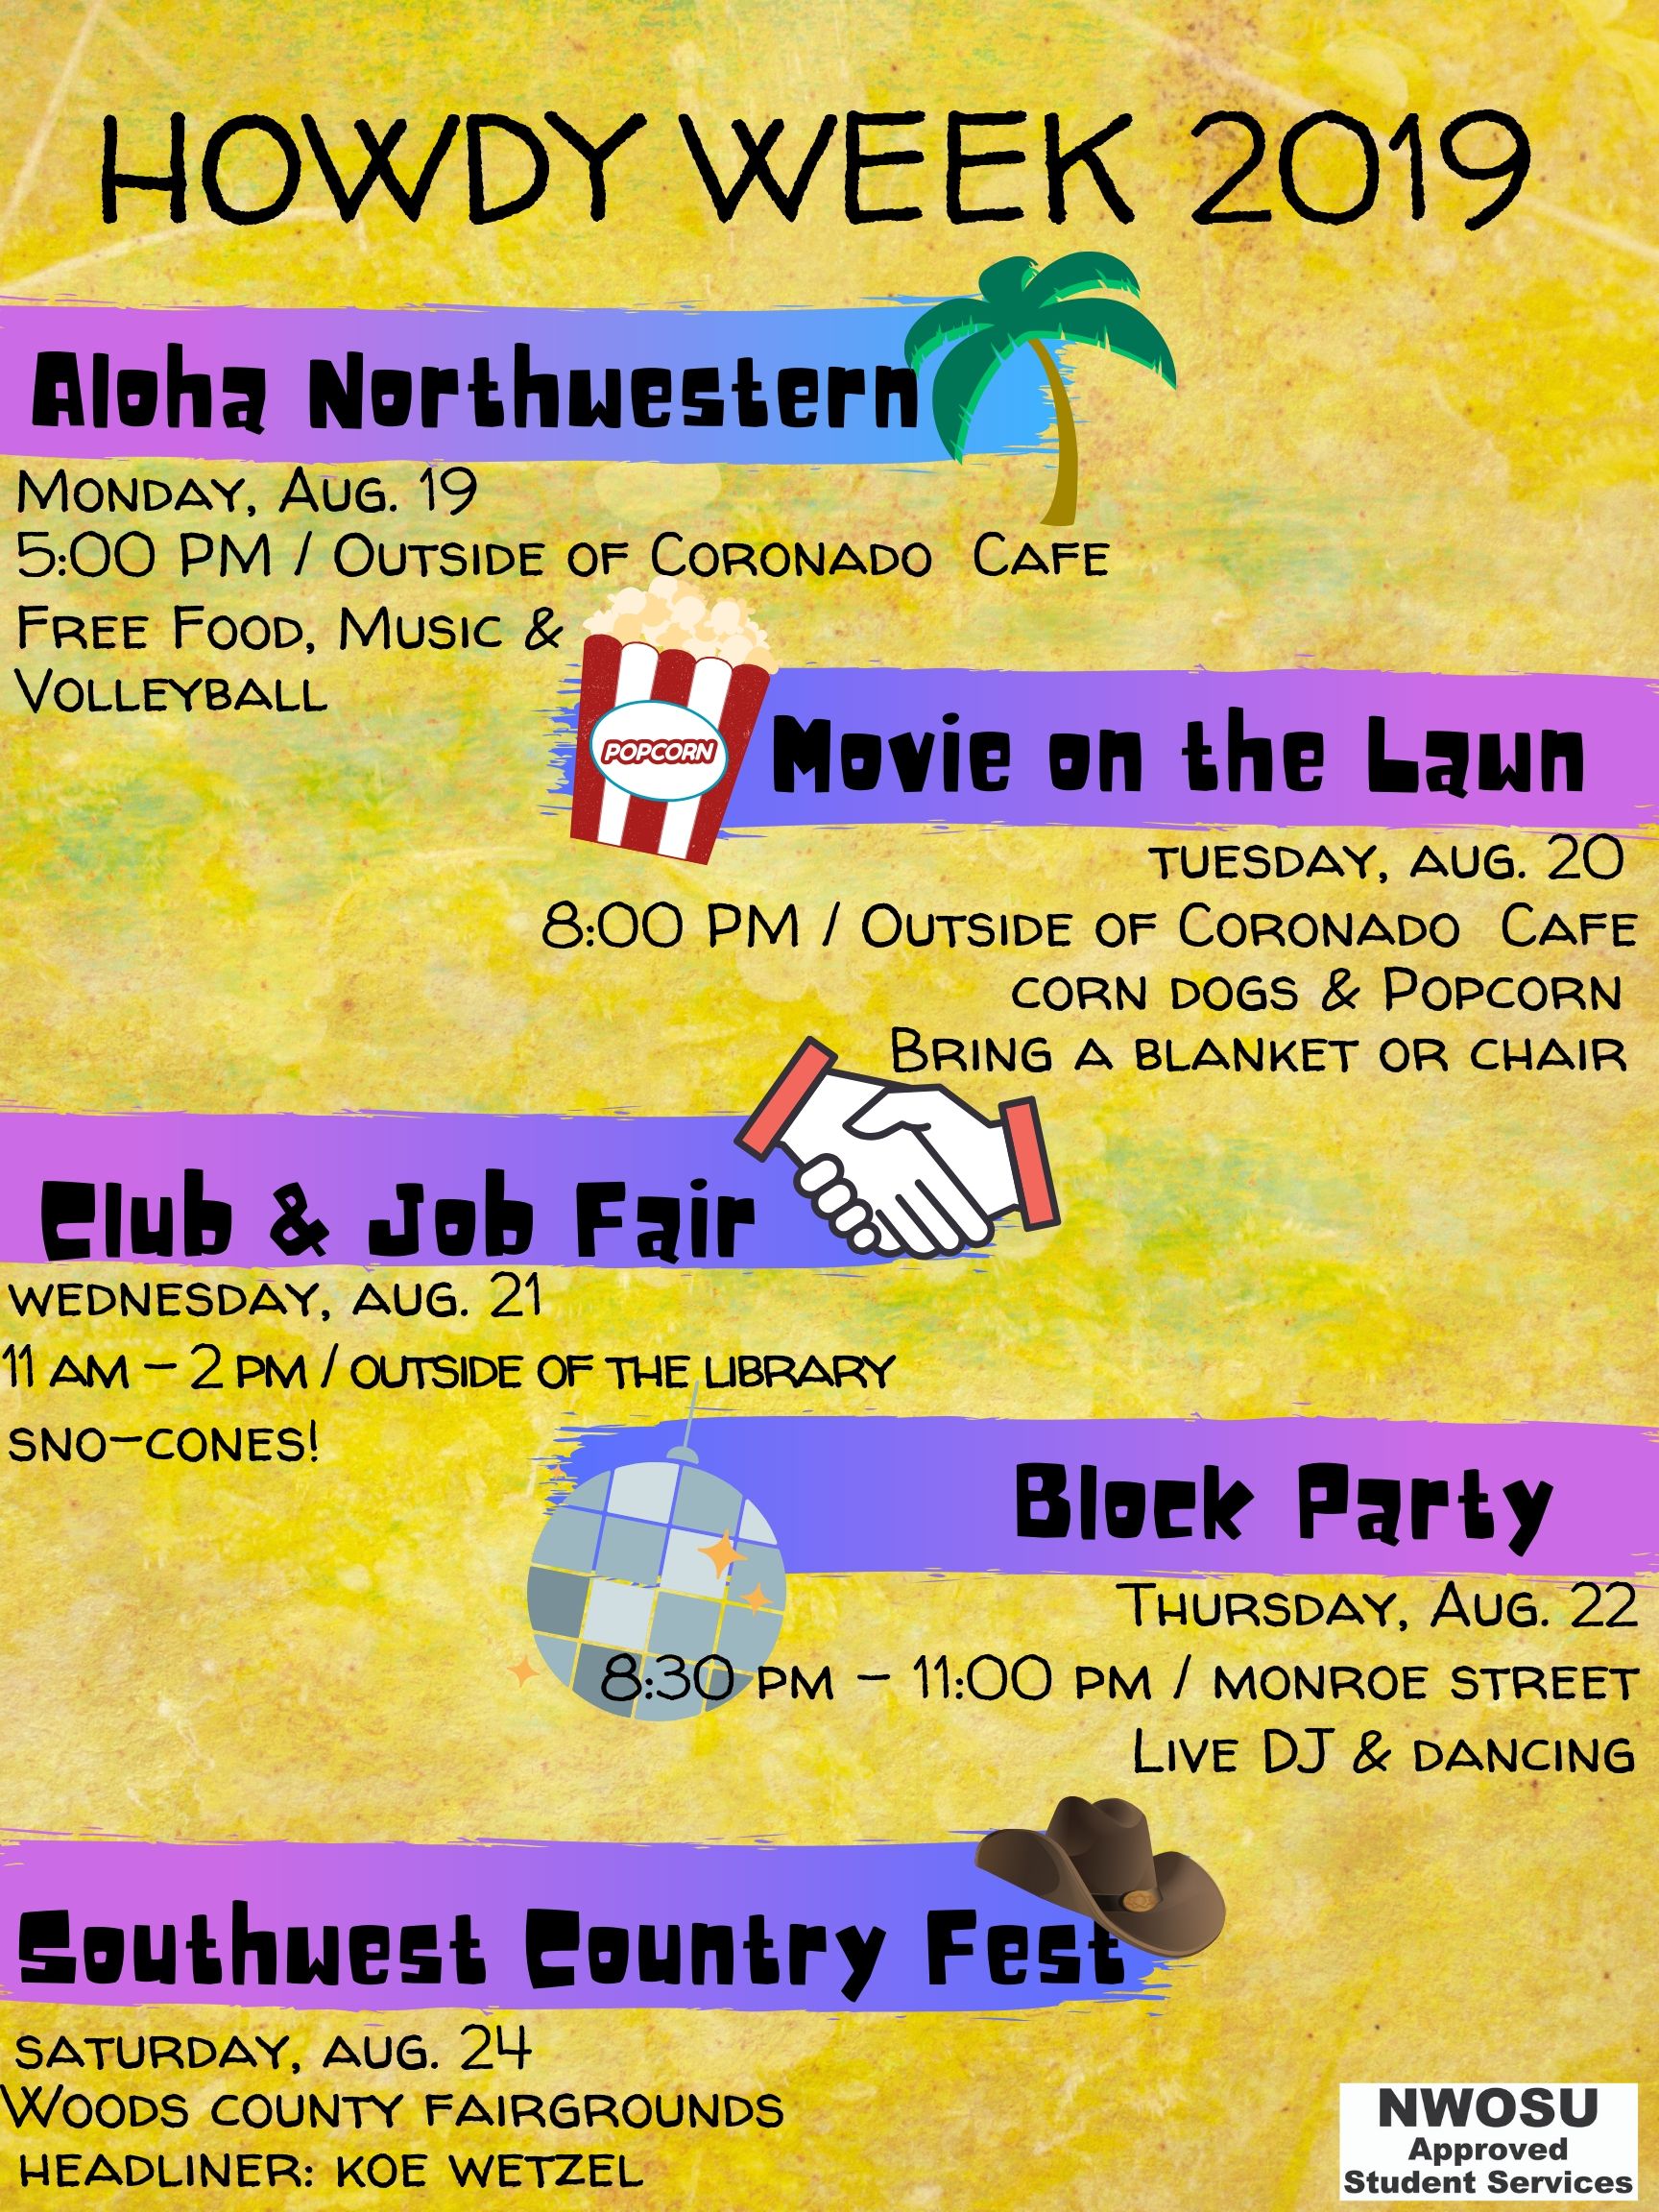 Howdy Week at Northwestern to be filled with fun events, free food for students | Northwestern